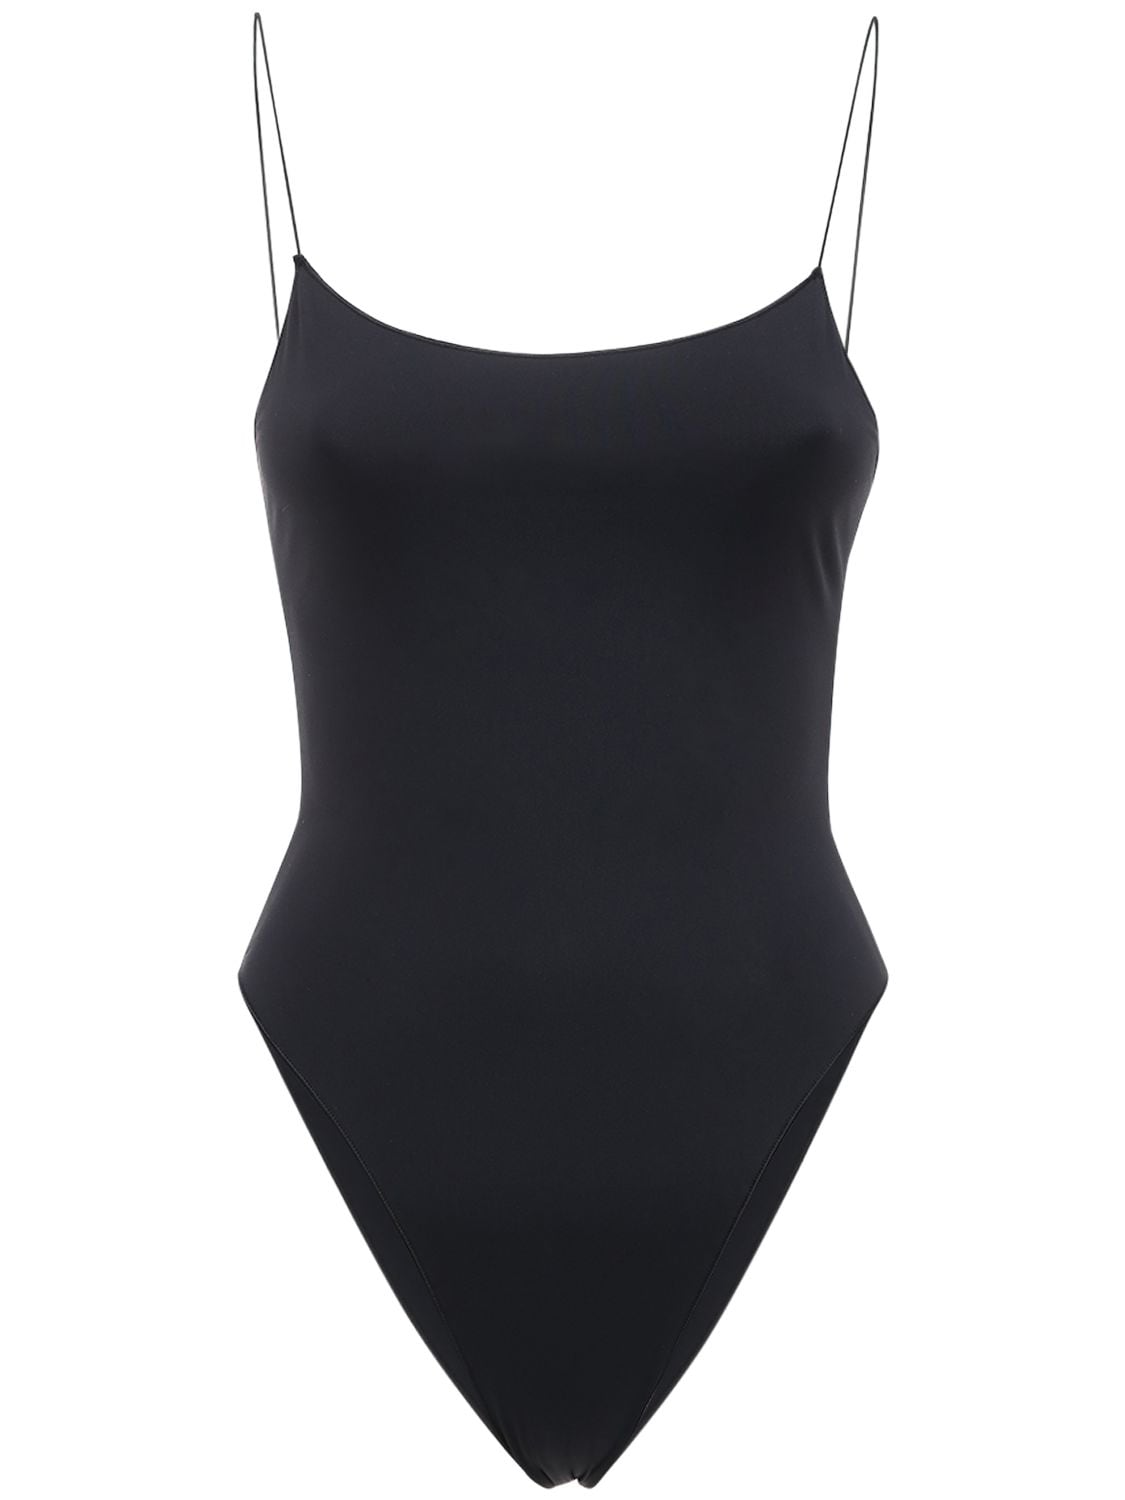 The C Recycled Tech One Piece Swimsuit